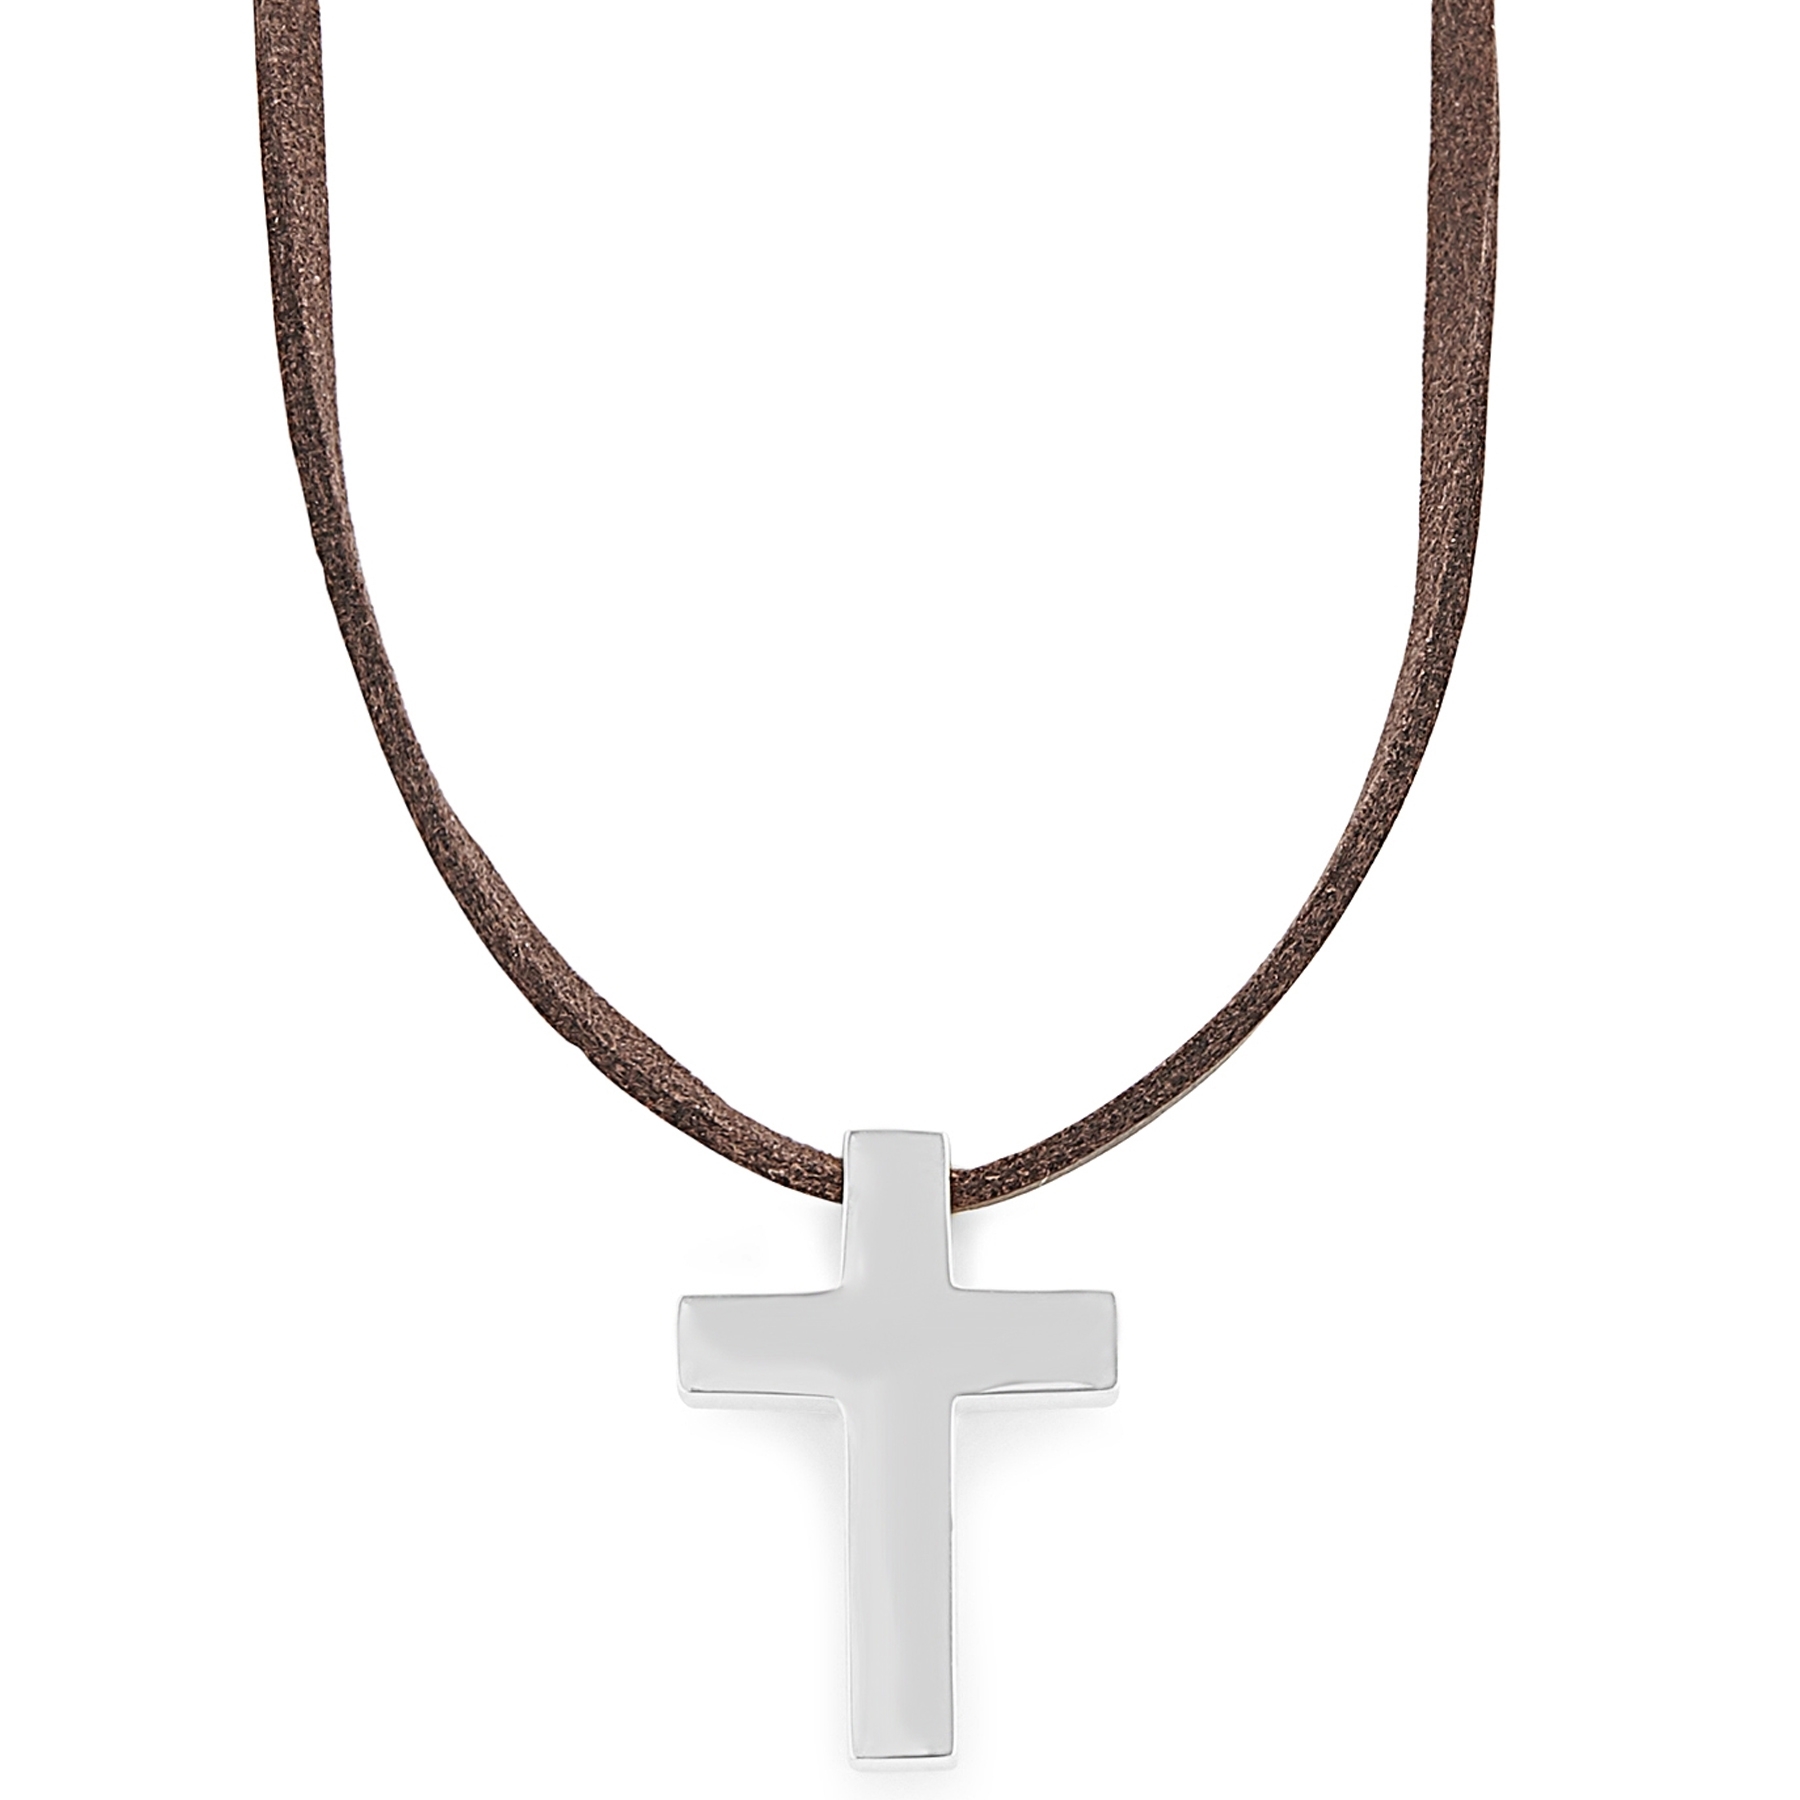 Novica Artisan Crafted Men's Sterling Leather Cross Necklace - QVC.com